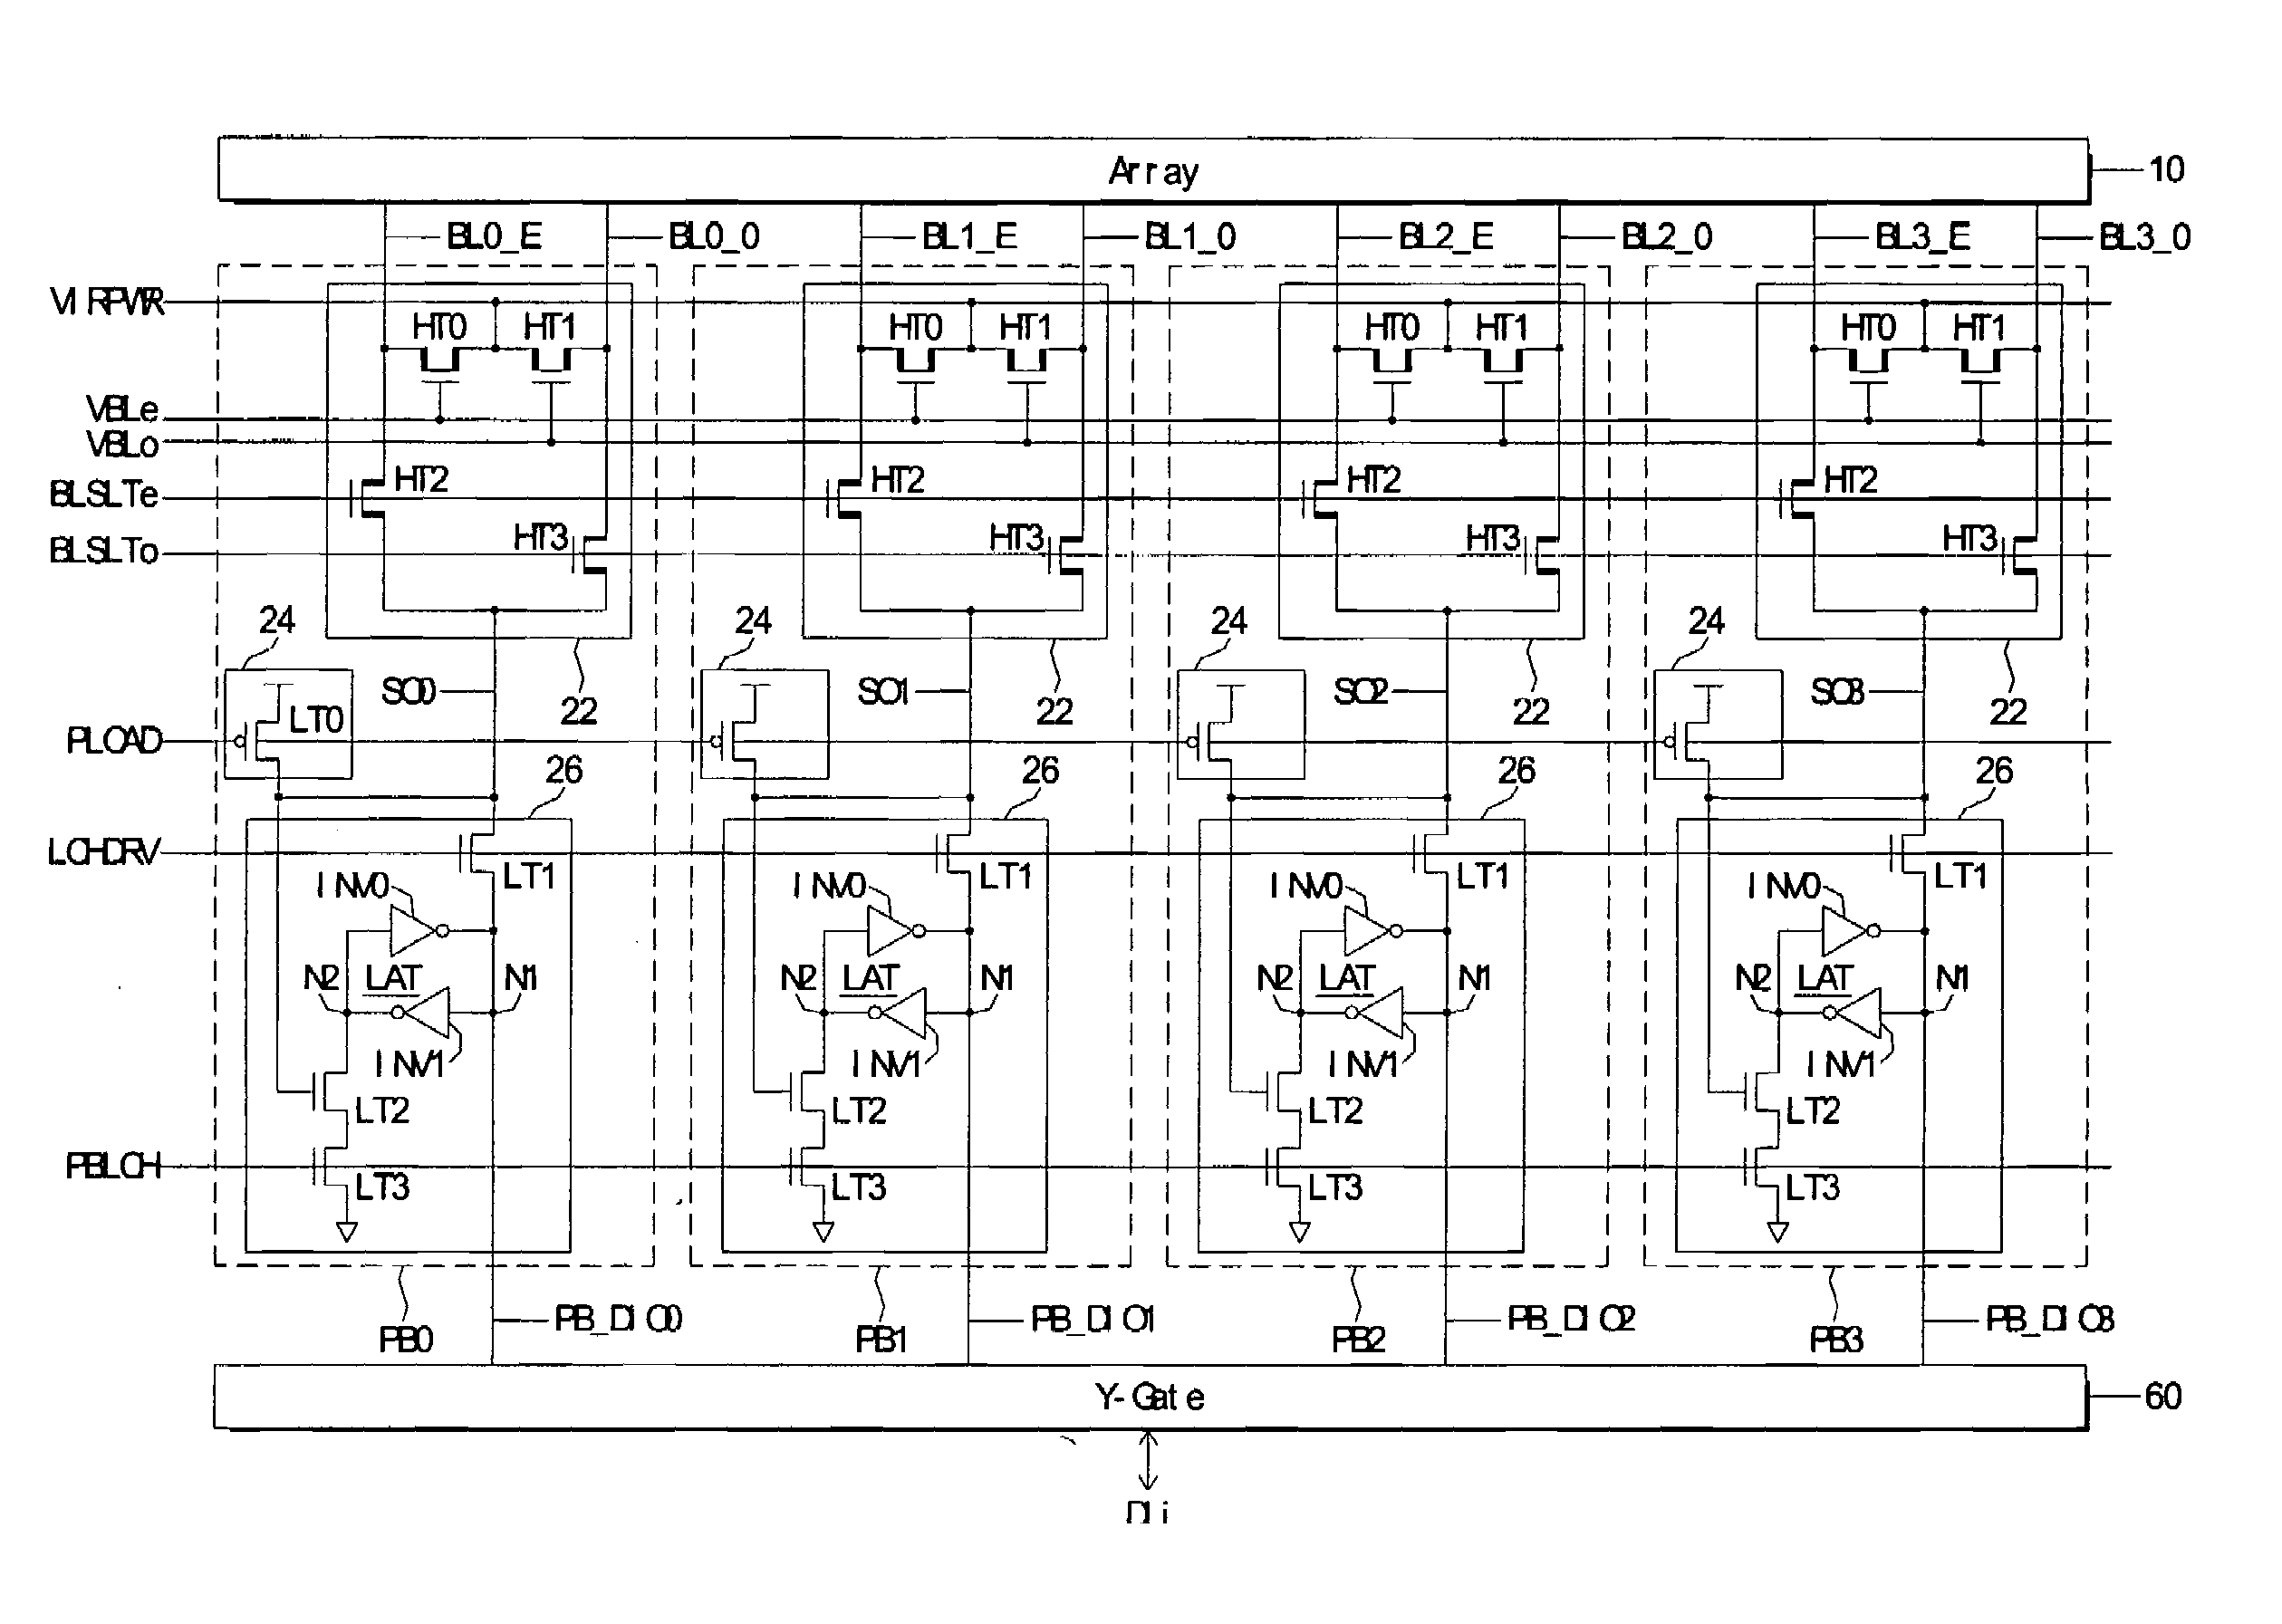 Semiconductor device for reducing coupling noise